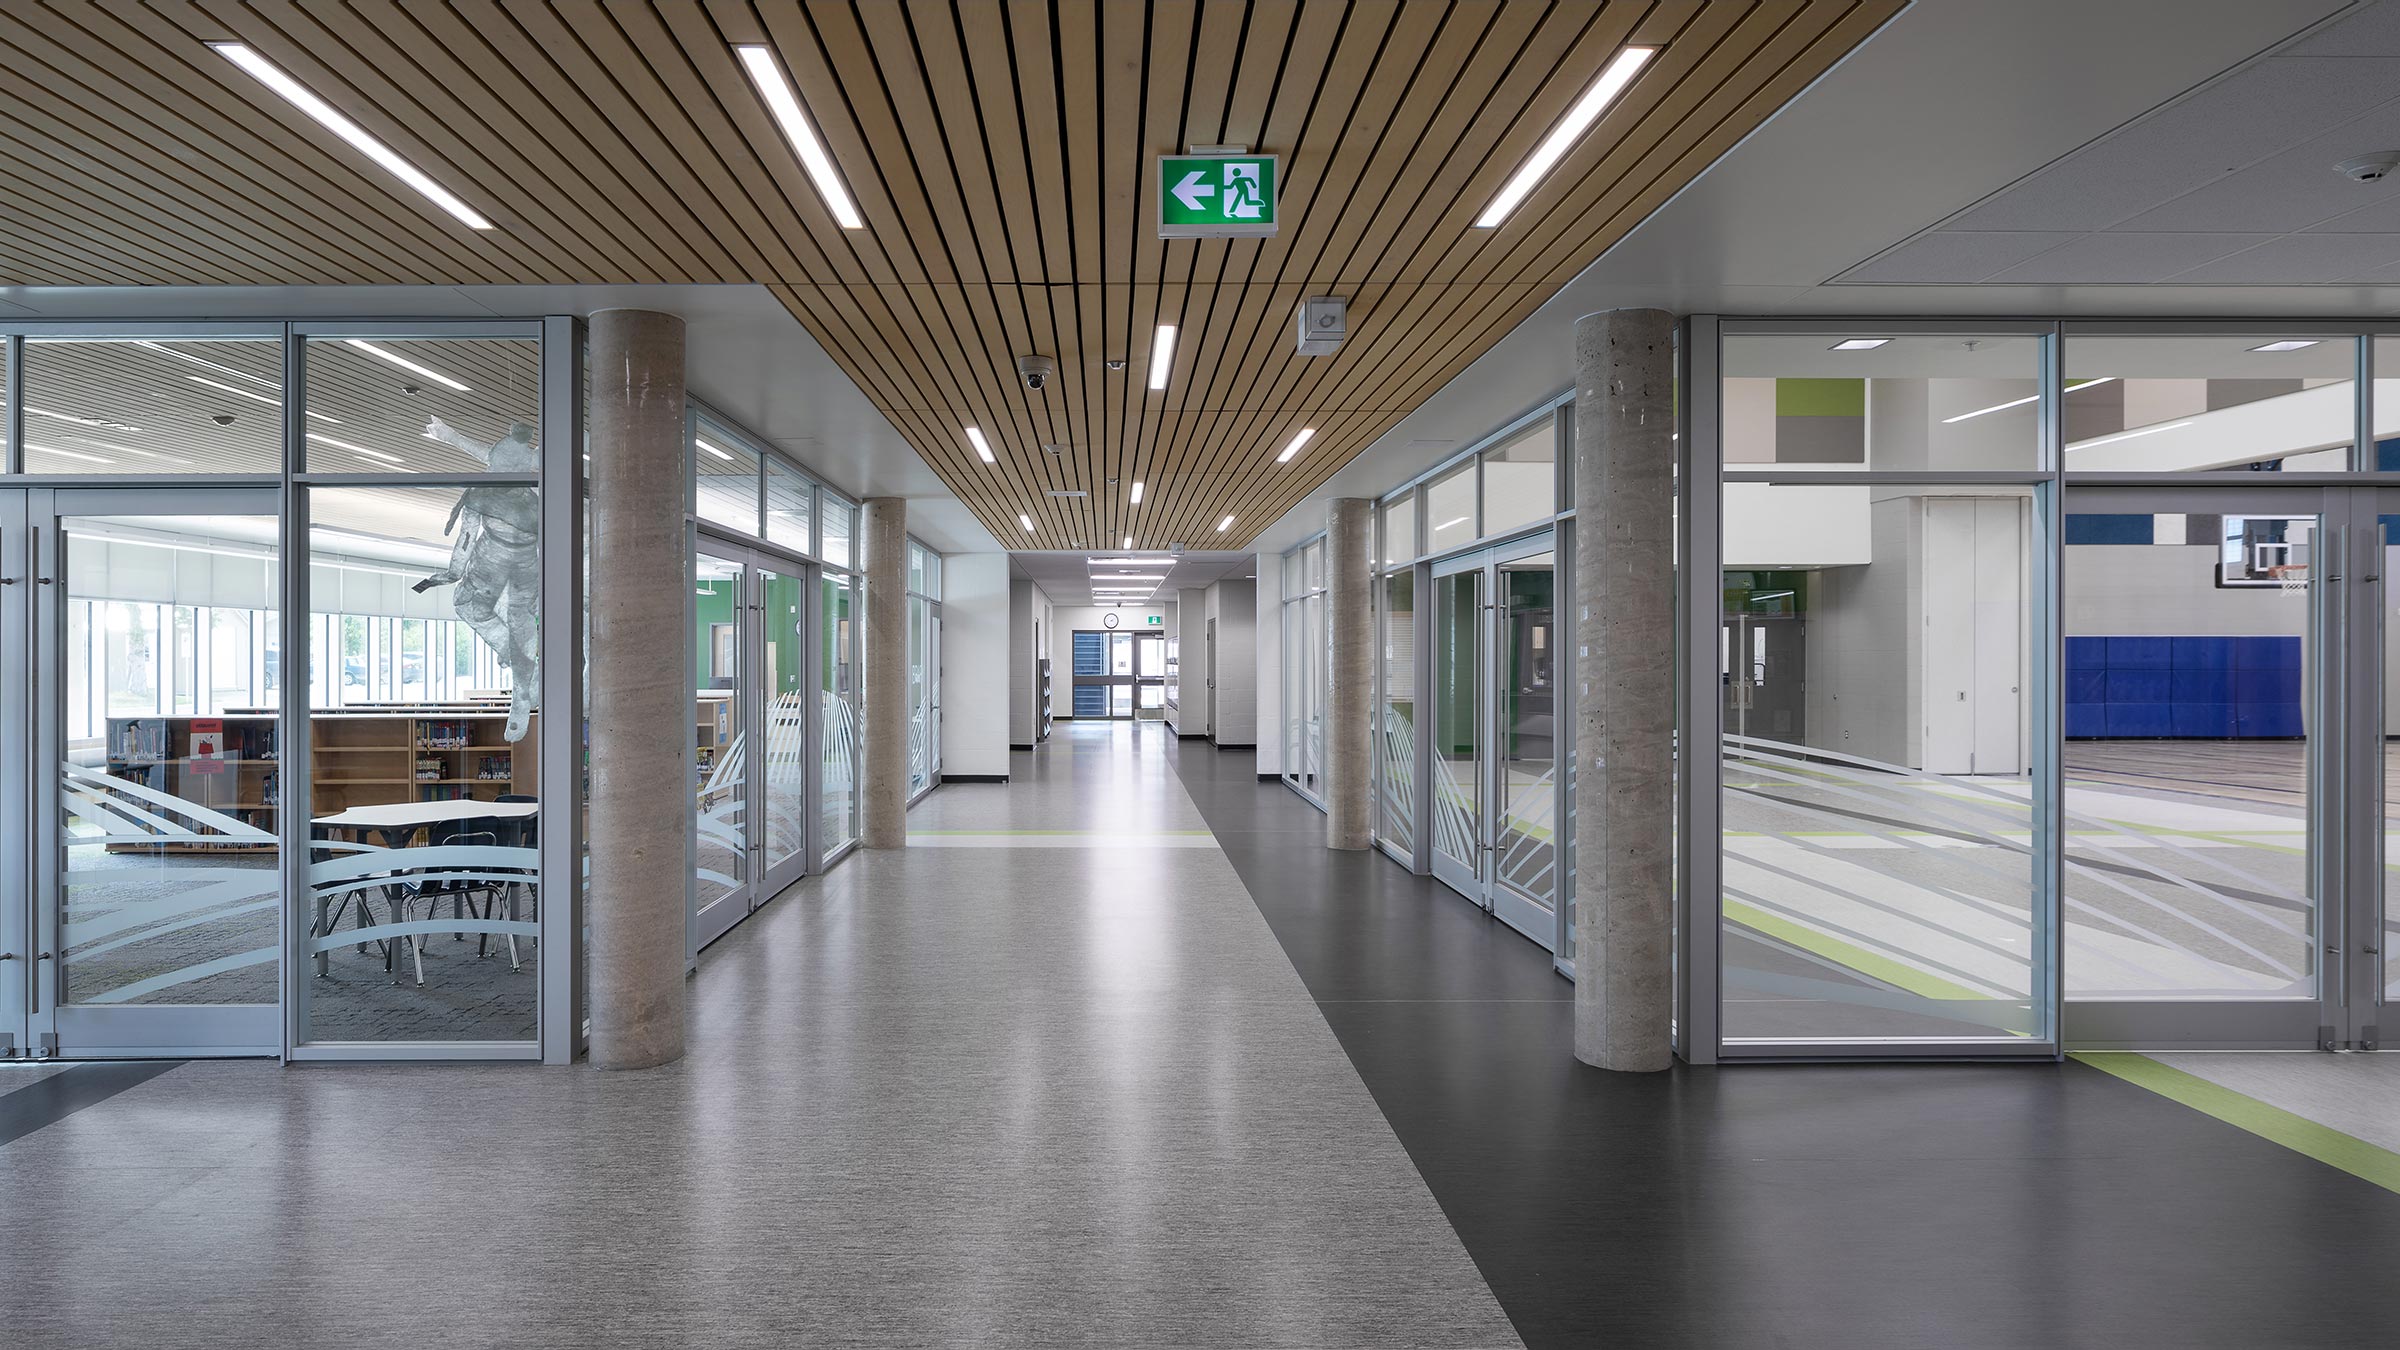 Neepawa Middle School interior with connecting shared school spaces.